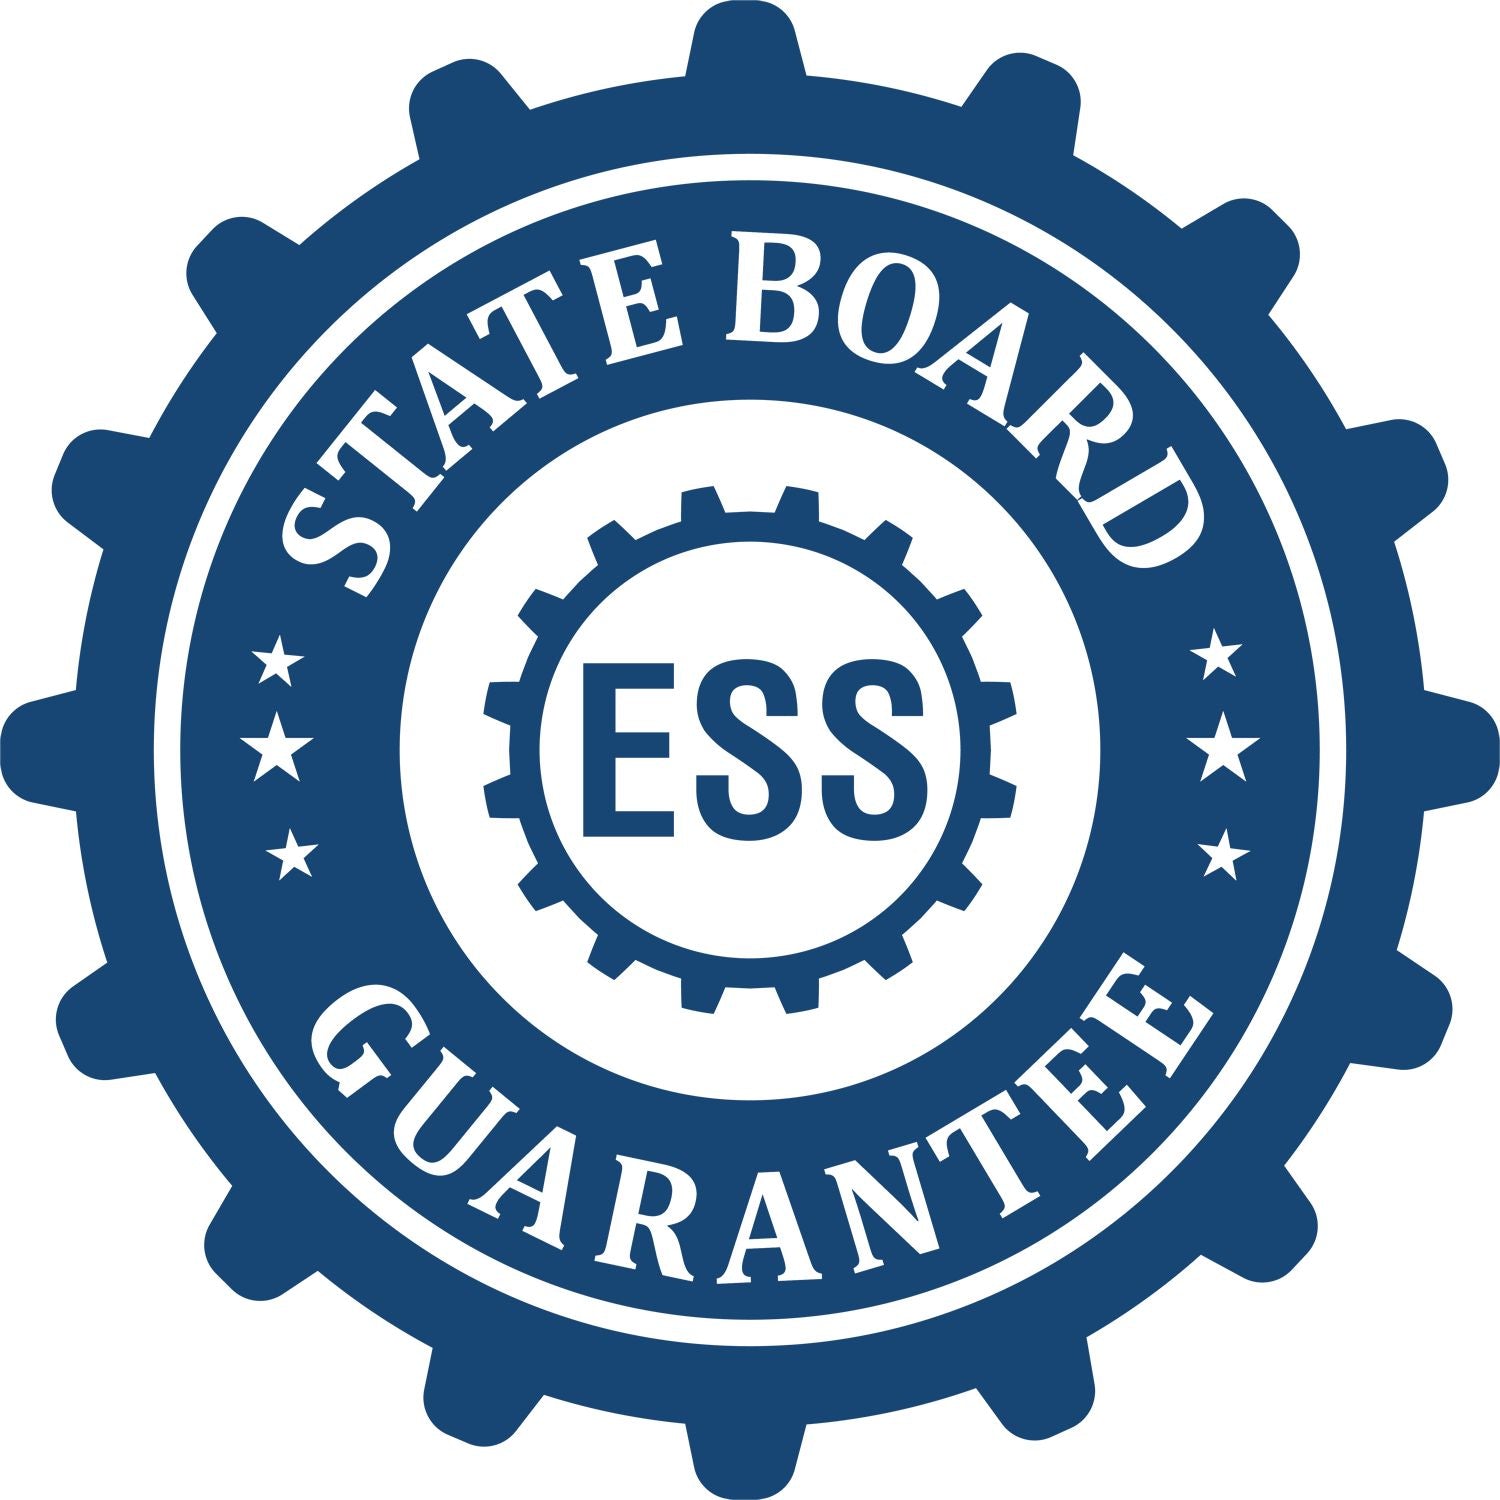 An emblem in a gear shape illustrating a state board guarantee for the Handheld New Mexico Land Surveyor Seal product.